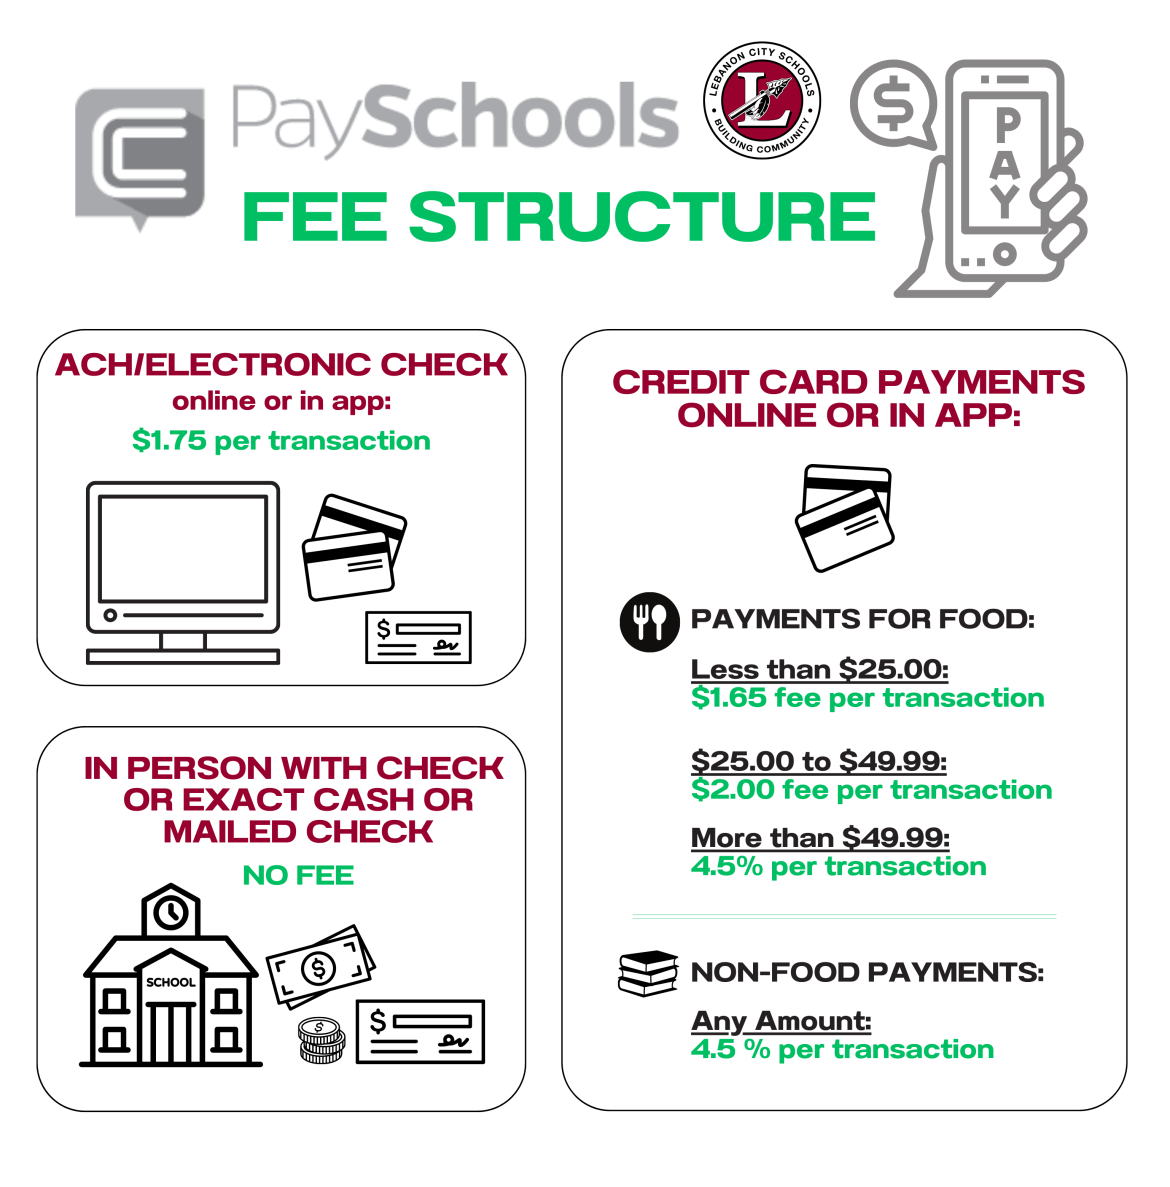 PaySchools Fee Structure